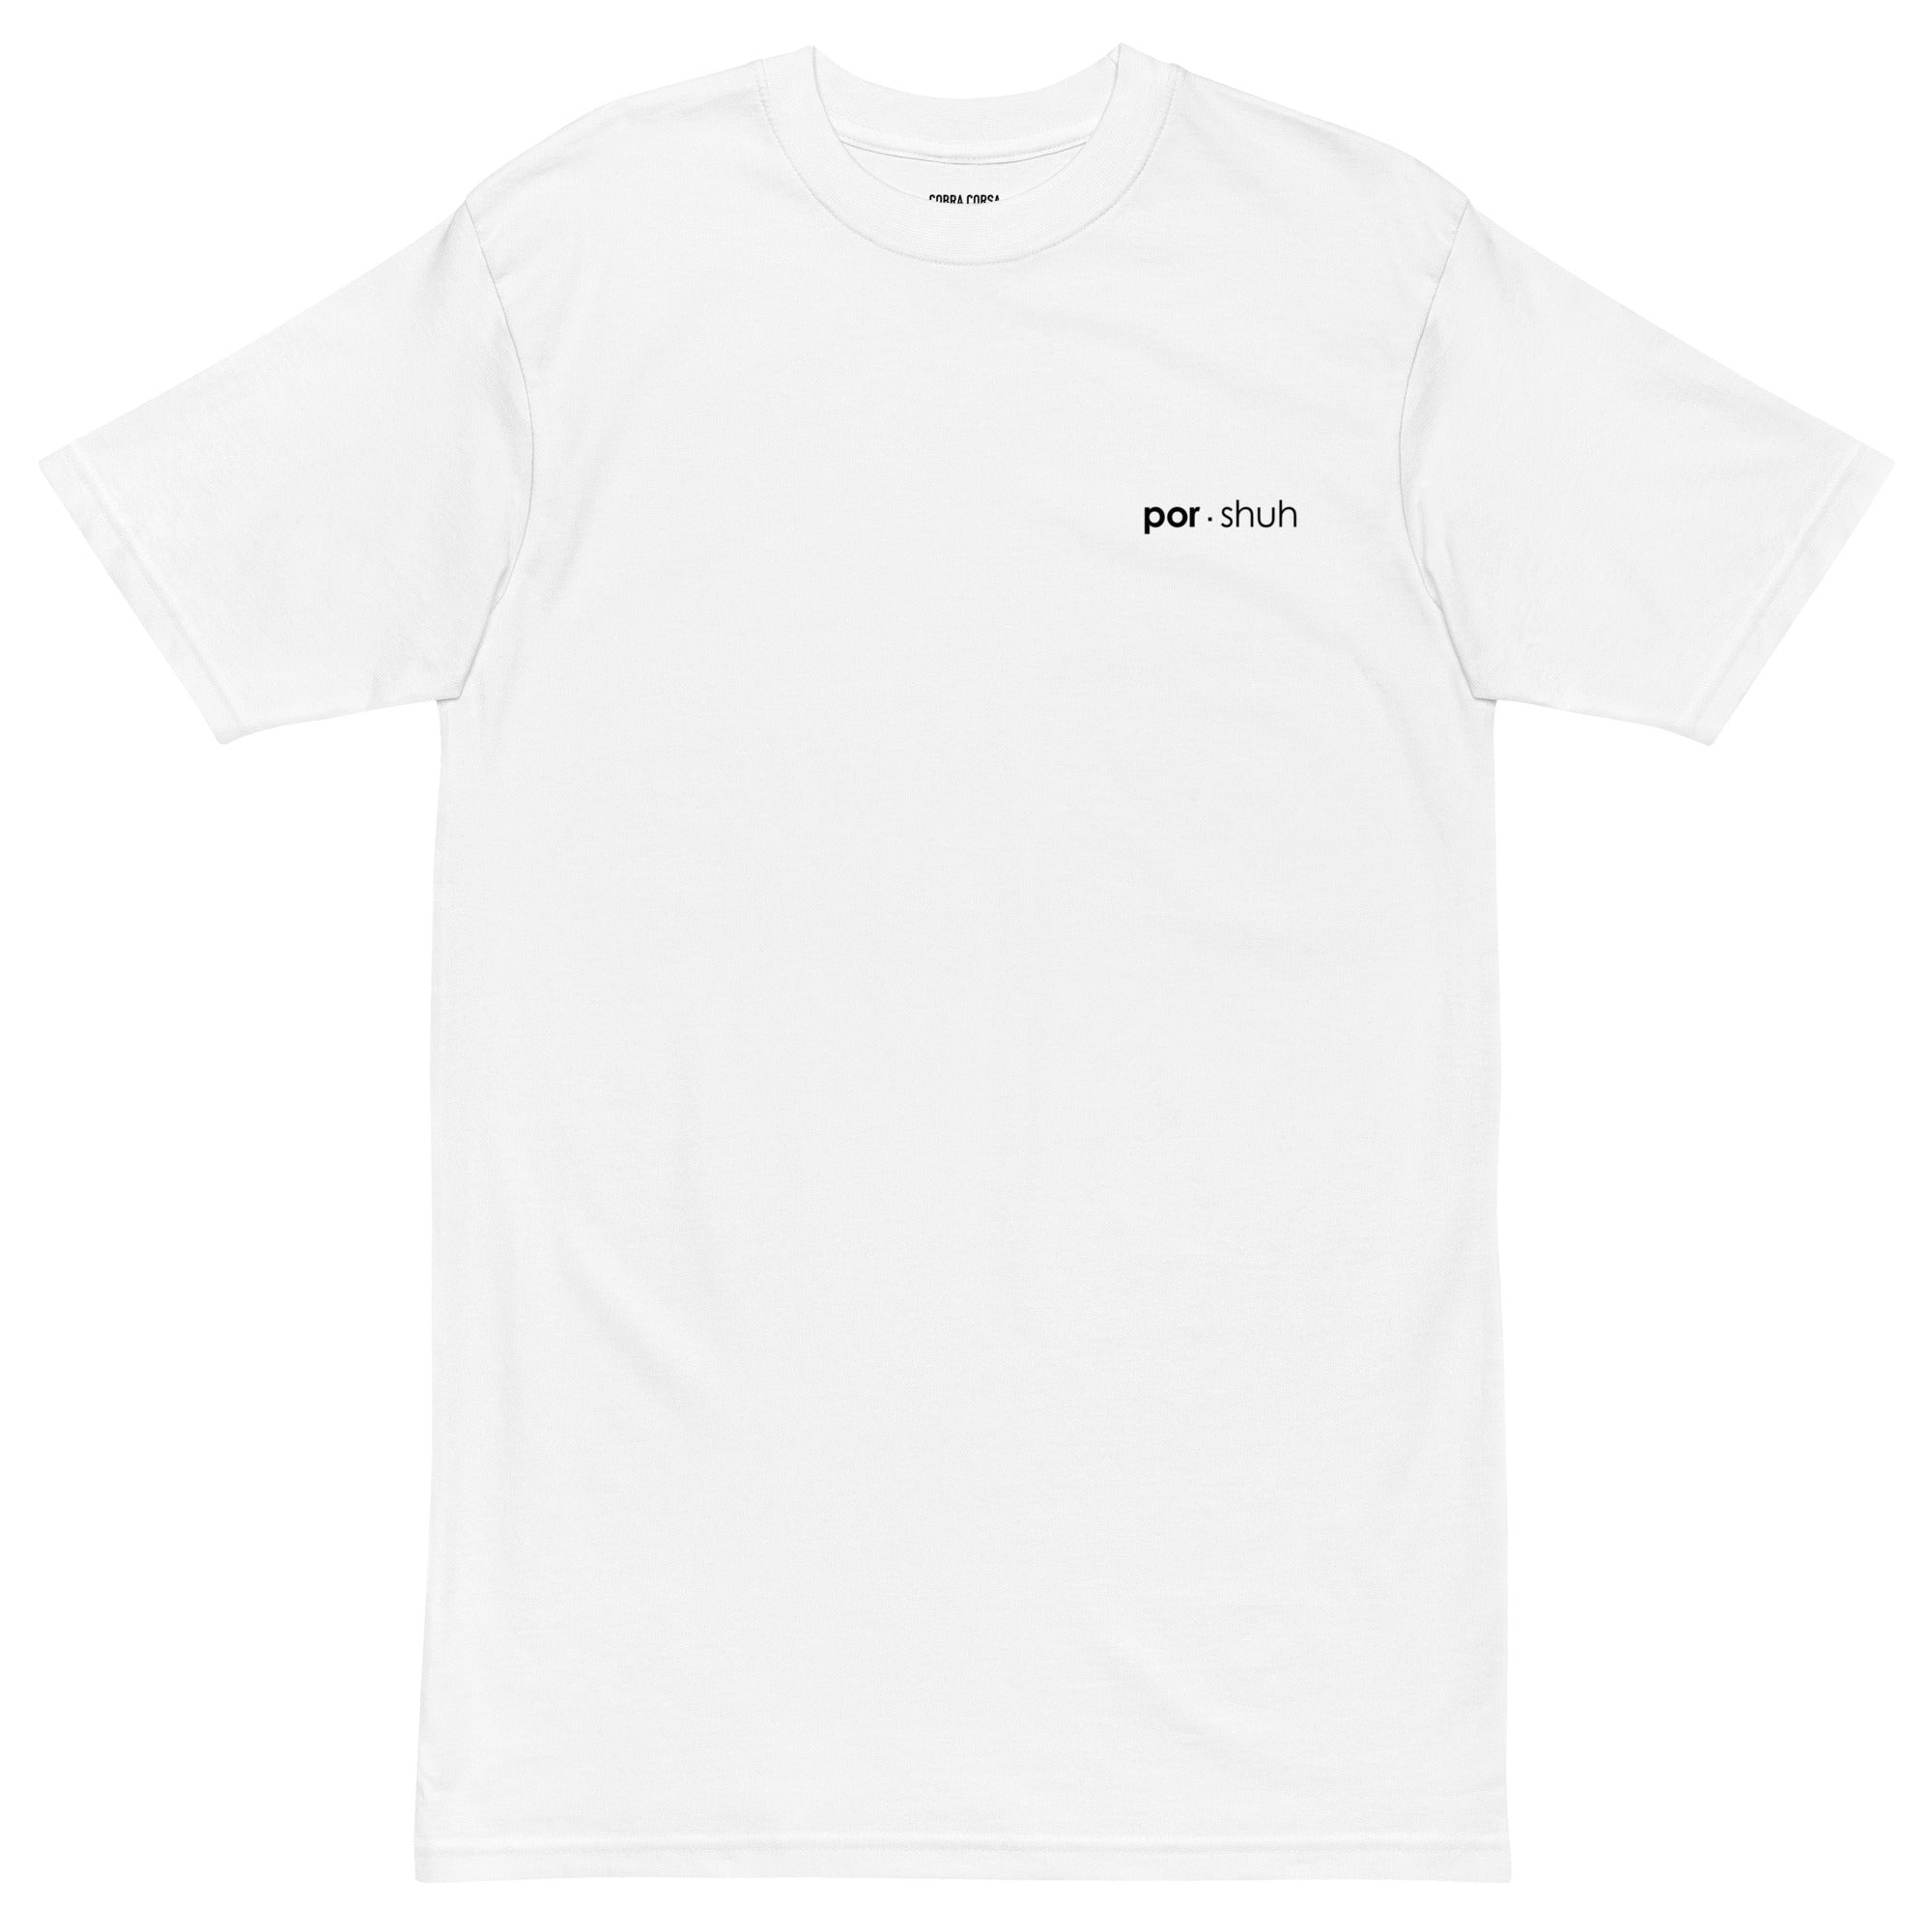 Two Syllables Tee